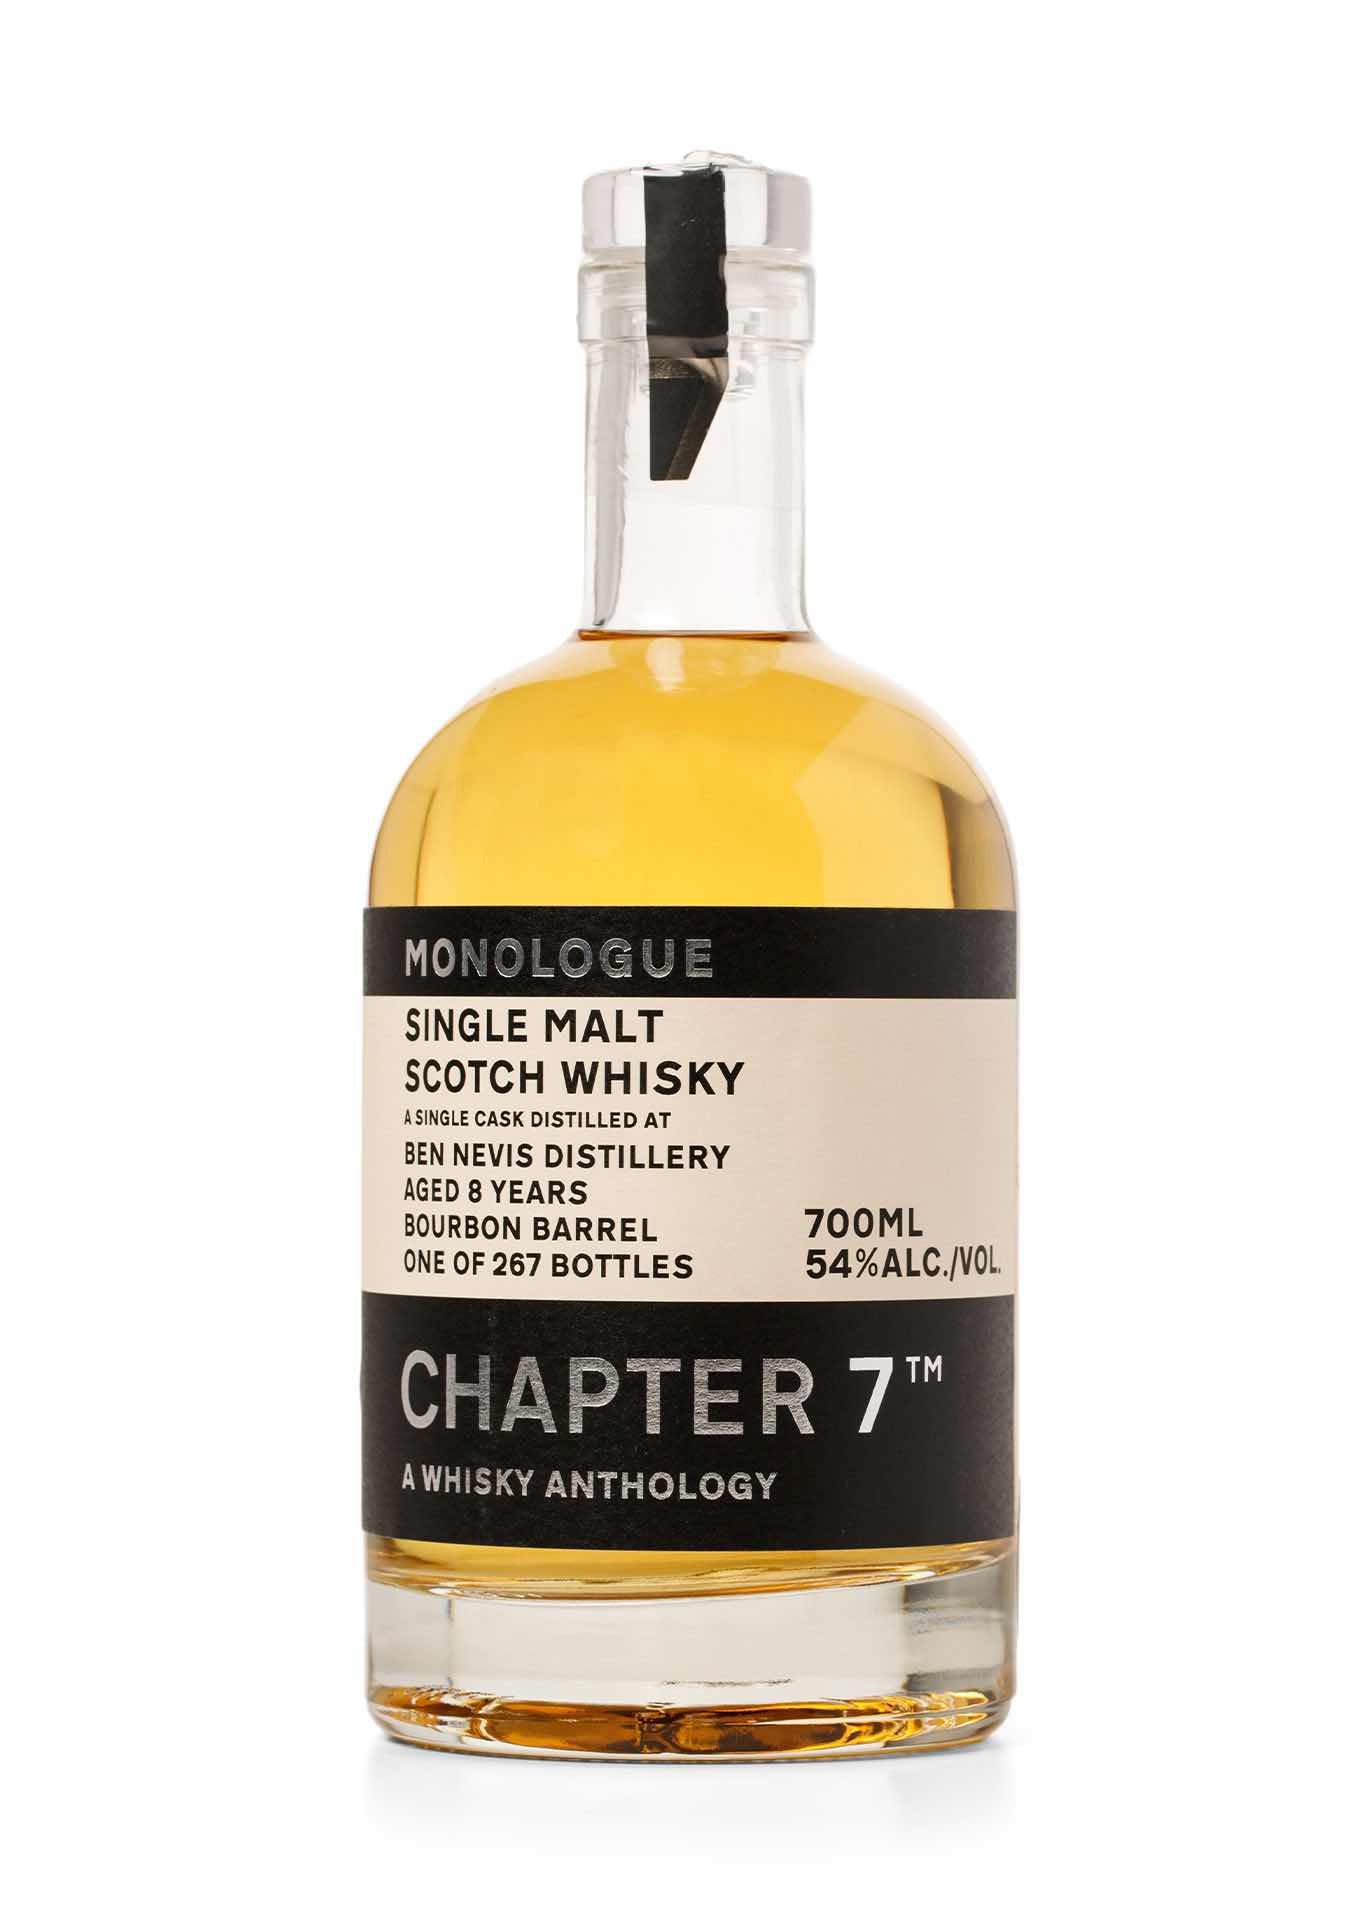 Chapter 7 Whisky: Ben Nevis 8 Year Old